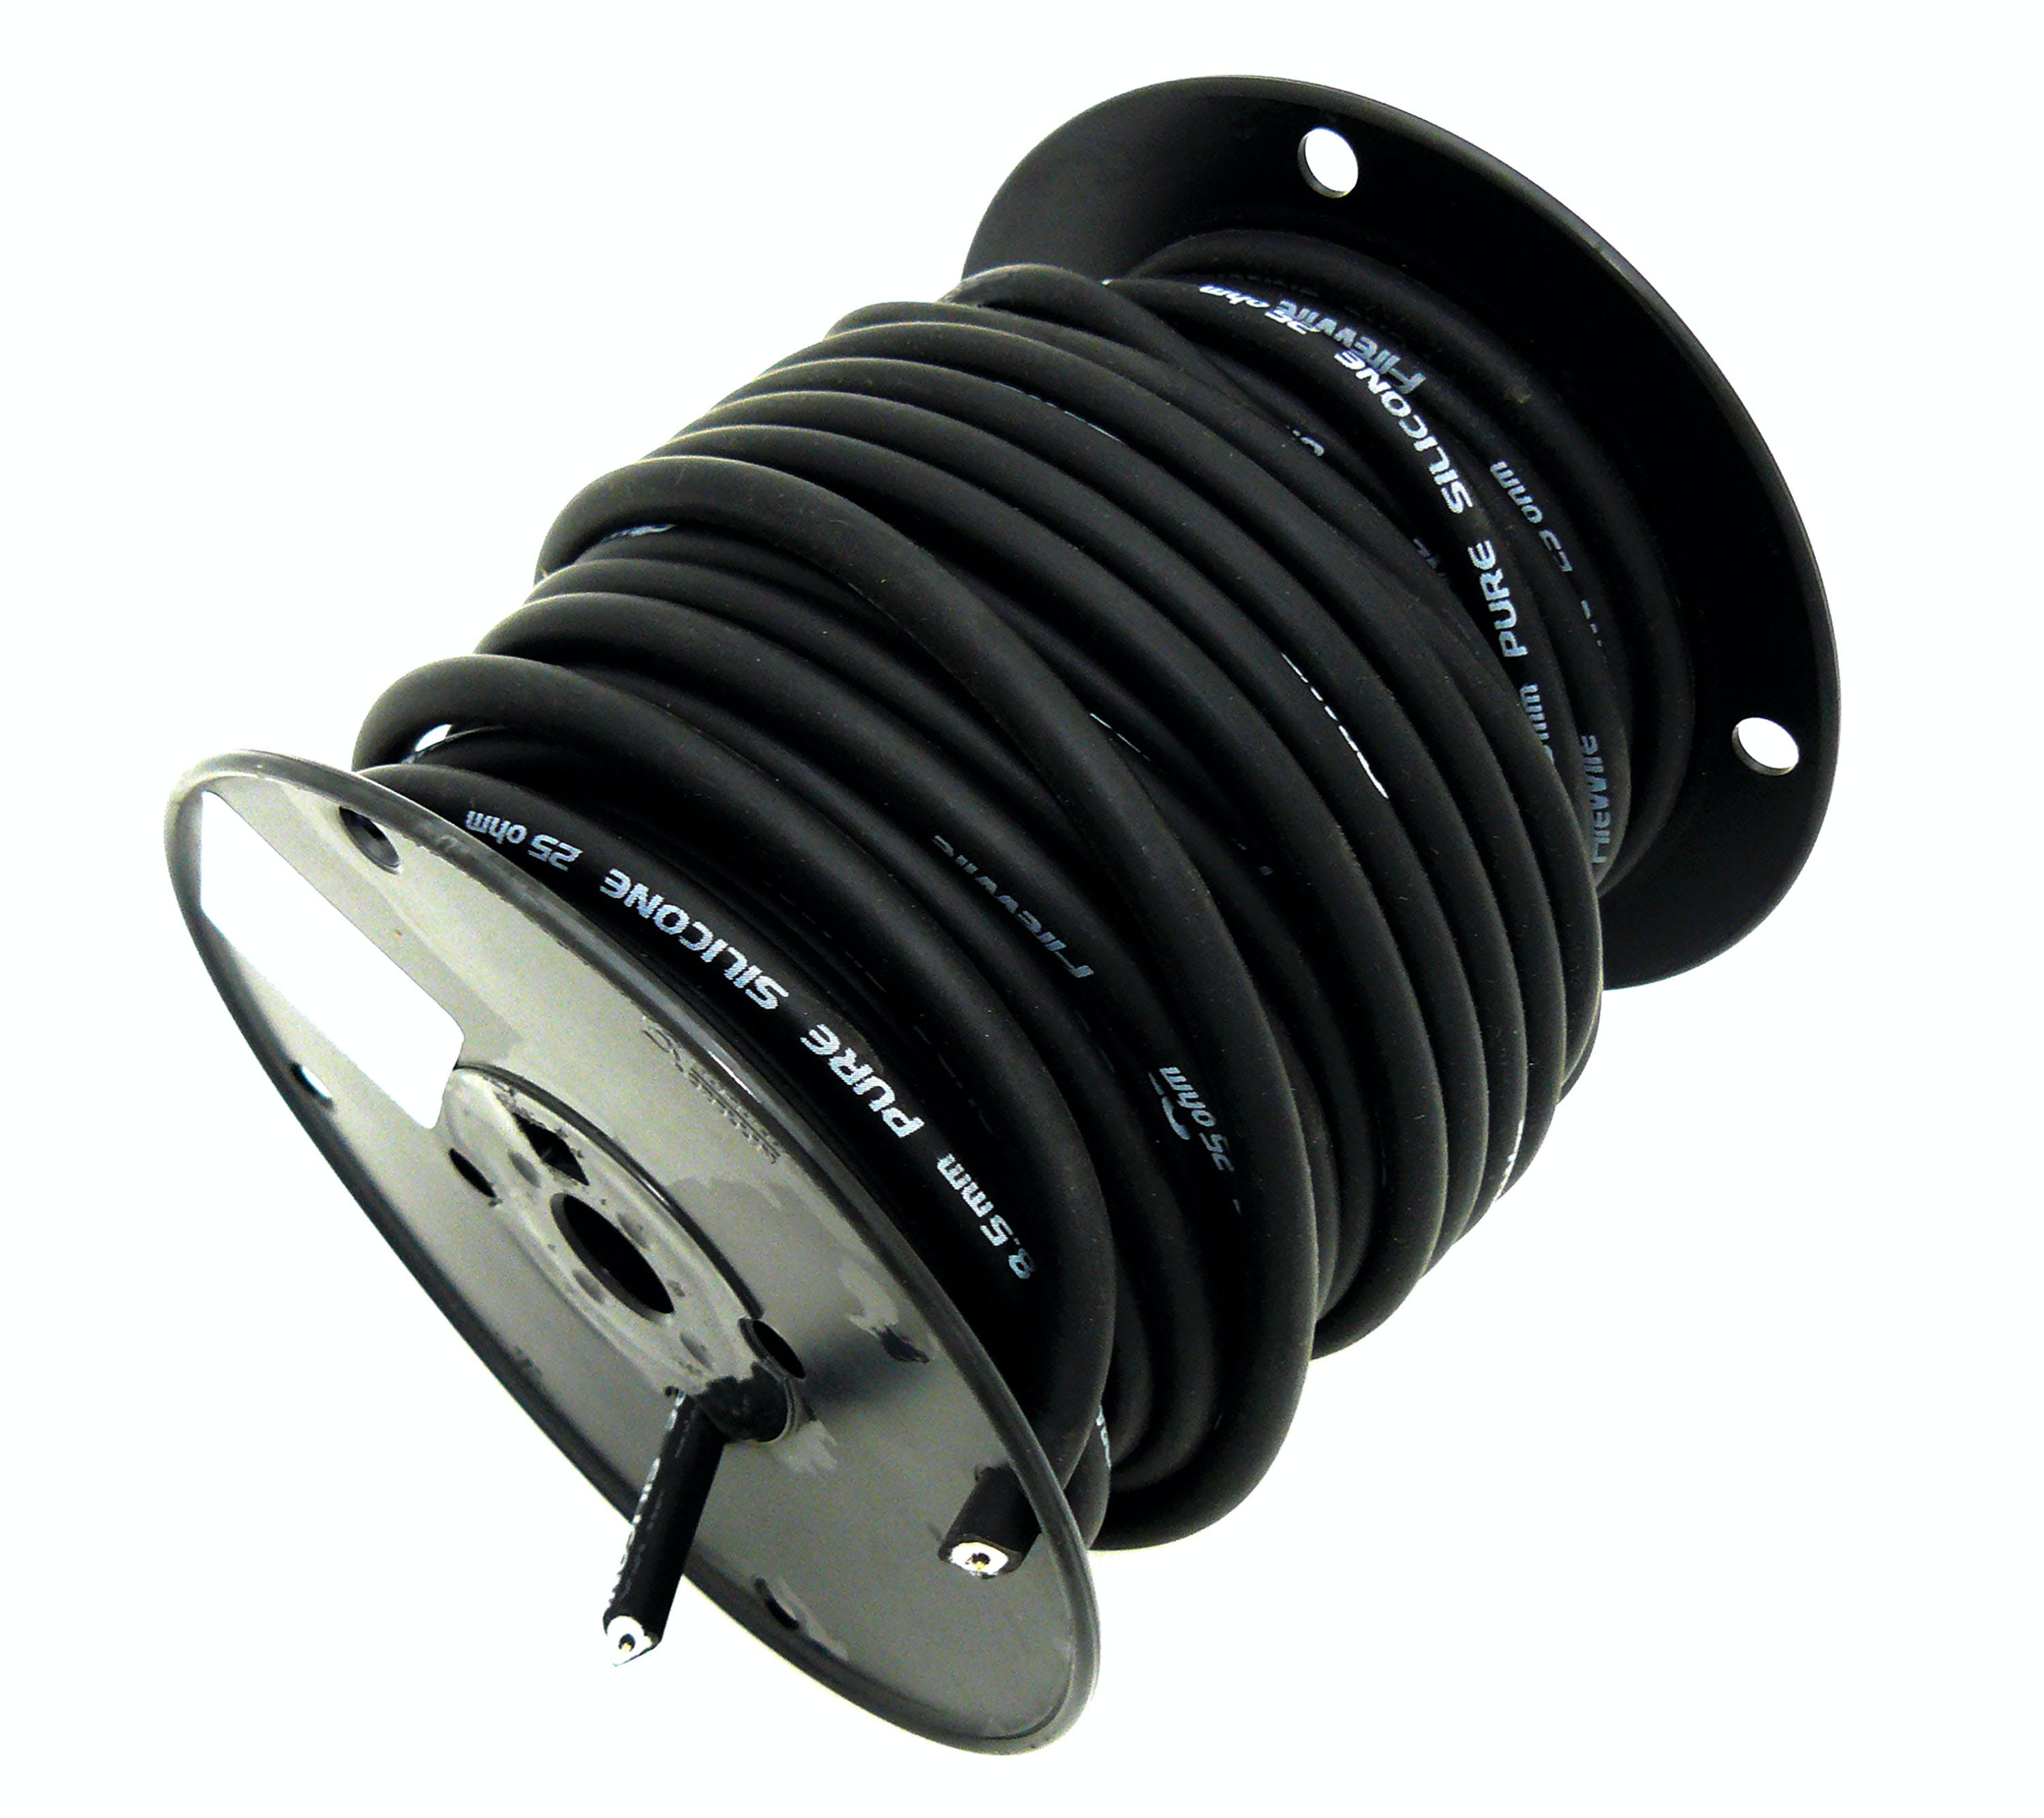 FAST - Fuel Air Spark Technology 255-0001 100 Spool of FireWire for custom Wireset creation.